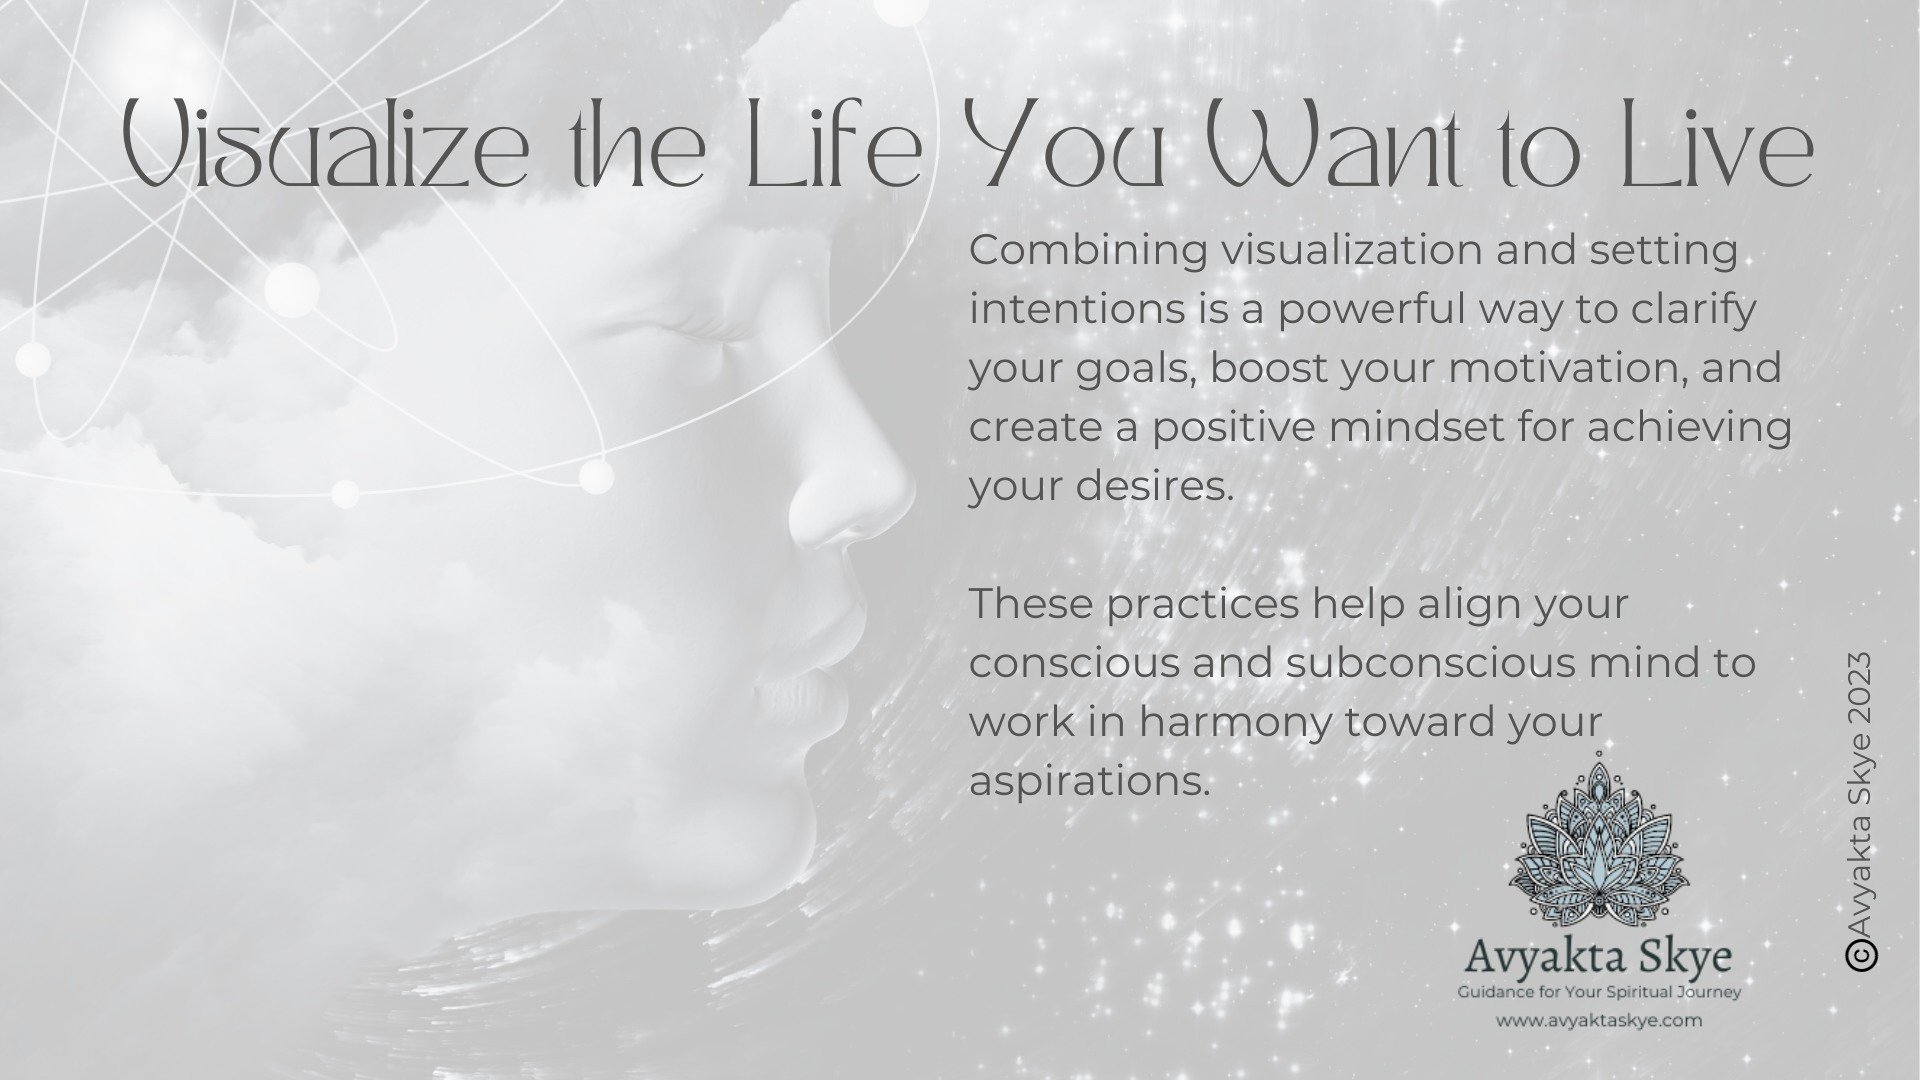 We all have an idea of the life we want to live. Are we actually living it? Using creative visualization and setting intentions are wonderful tools to help achieve your goals. 

Maybe your goal is simply to accomplish a task. Visualize that the task 